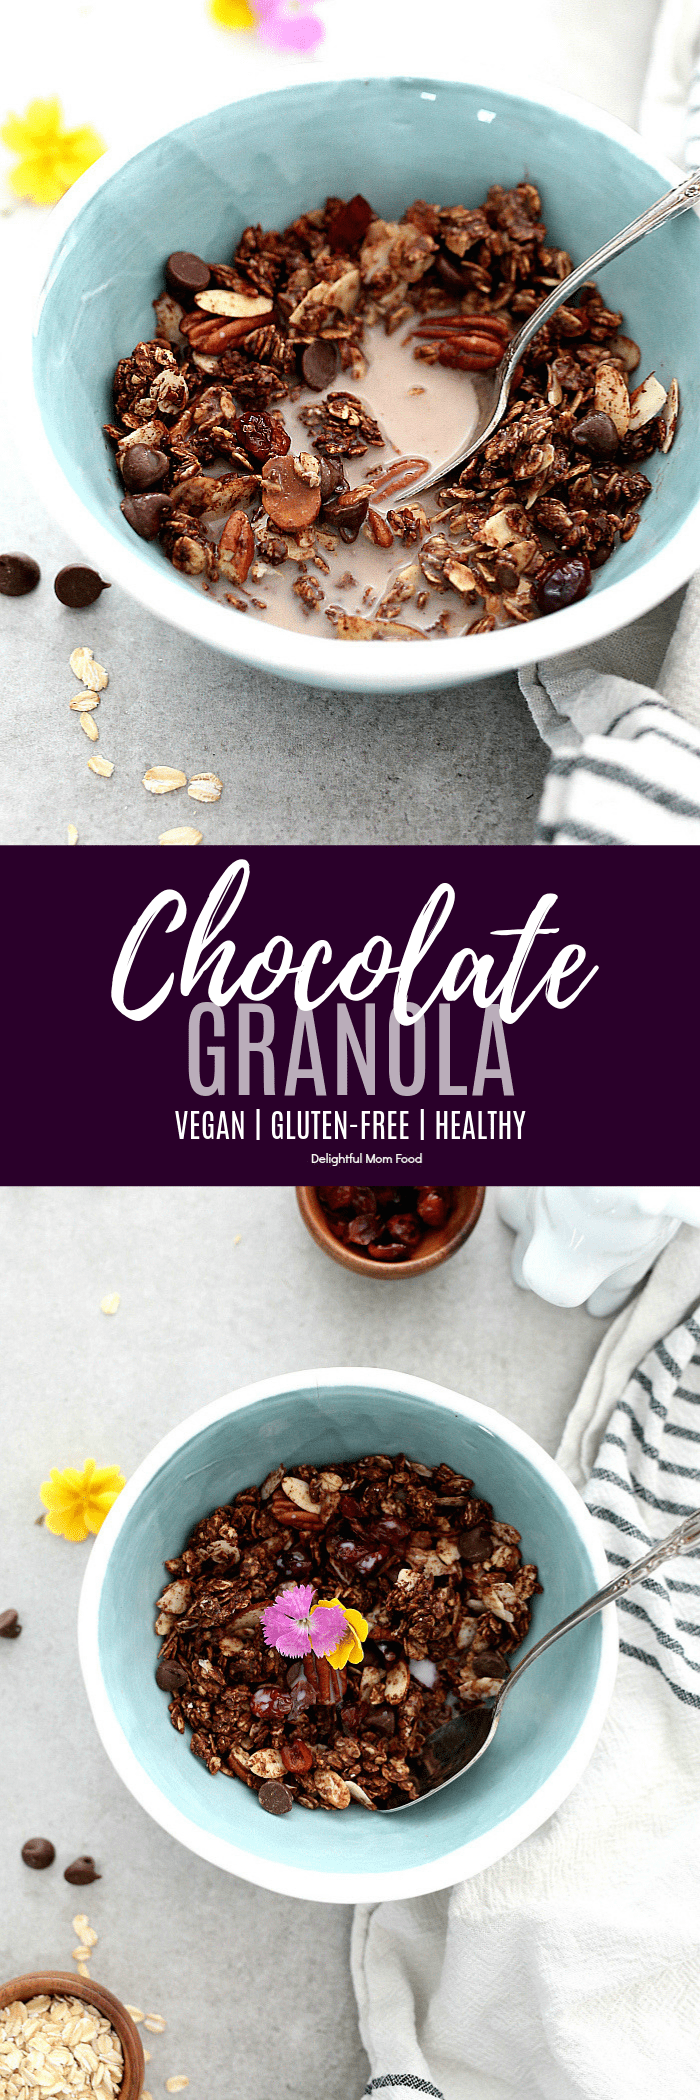 Transform mornings with this healthy chocolate granola recipe! Add your favorite nuts and dried fruit to this chocolate granola such as tangy dried cherries, chocolate chip morsels and pecans for a dreamy morning treat (vegan and gluten-free)!  #chocolate #granola #recipe #healthy #glutenfree #easy #vegan | recipe at delightfulmomfood.com